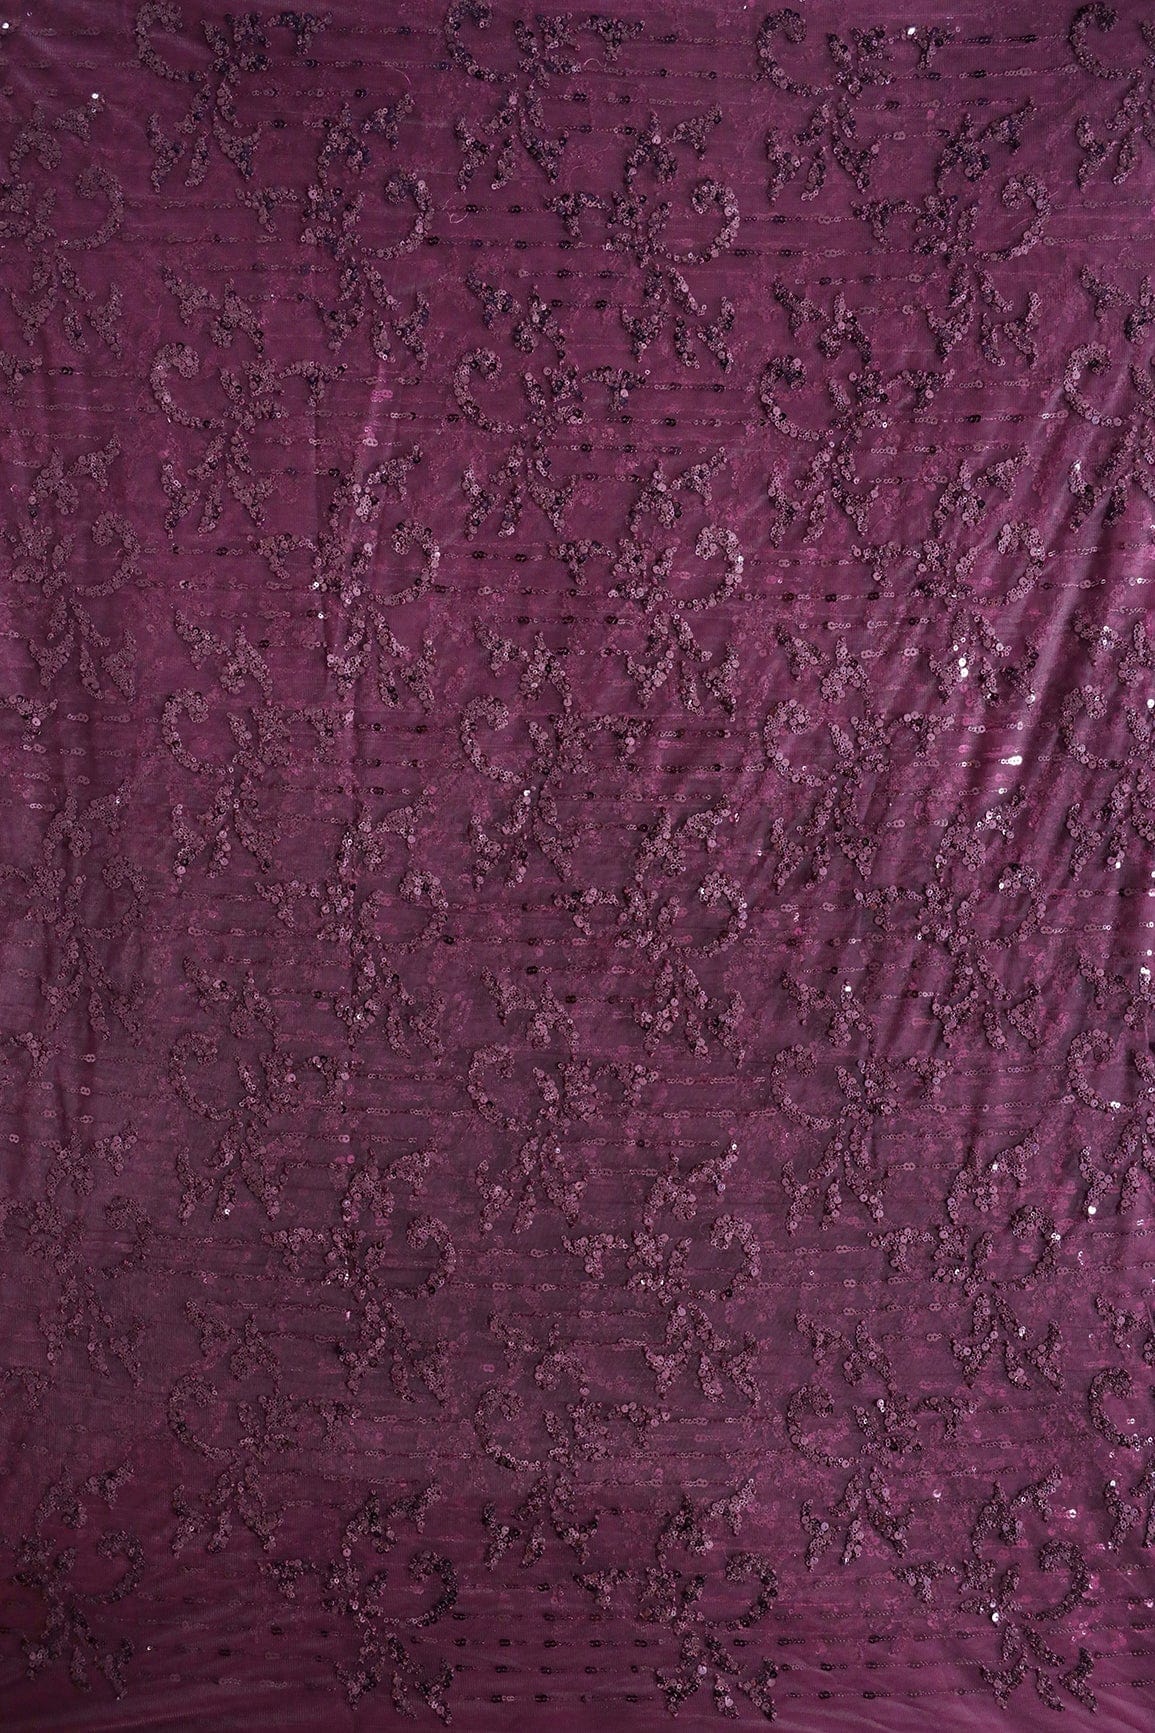 doeraa Embroidery Fabrics Wine Thread With Sequins Abstract Embroidery Work On Wine Soft Net Fabric